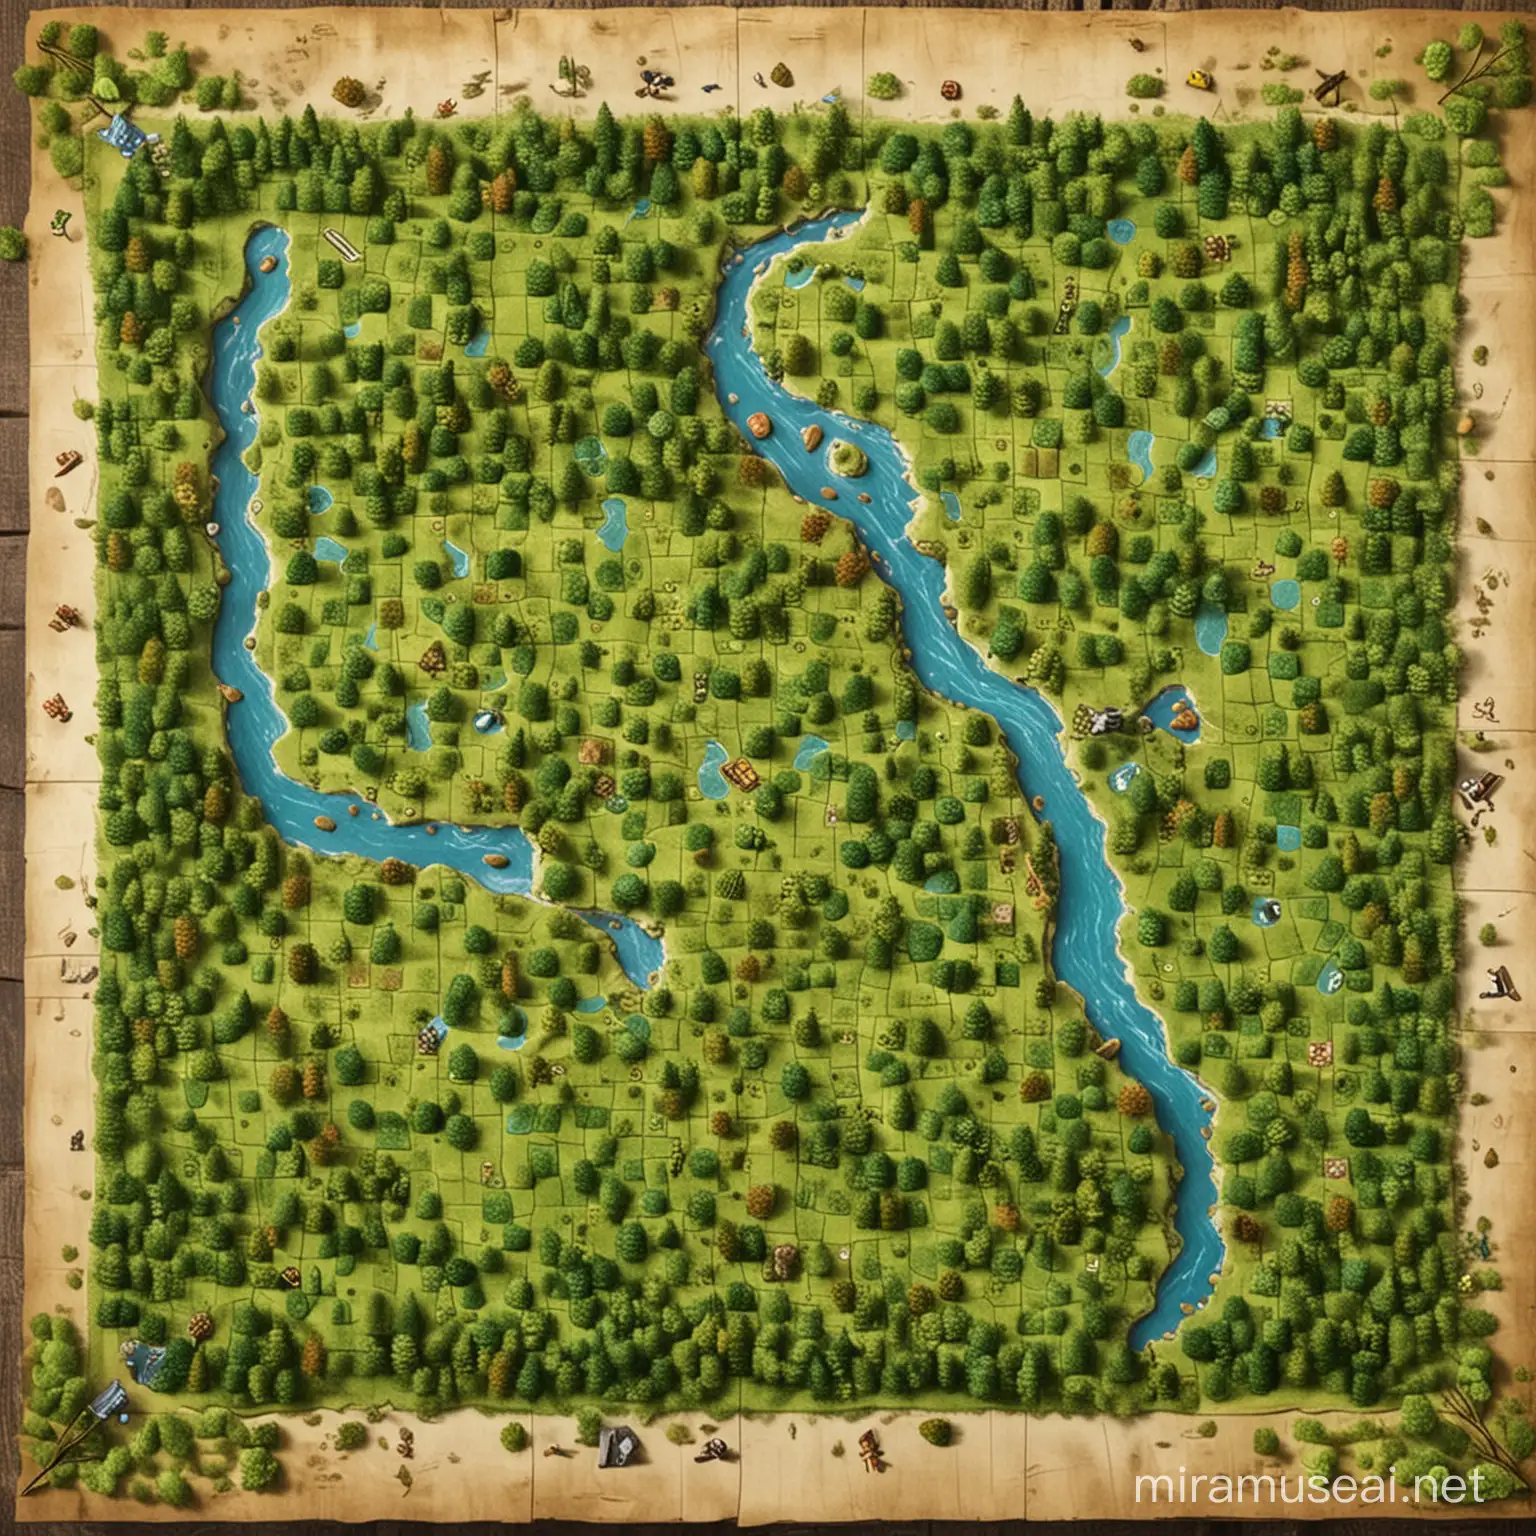 Make a grasslands map with forest, river for a board game